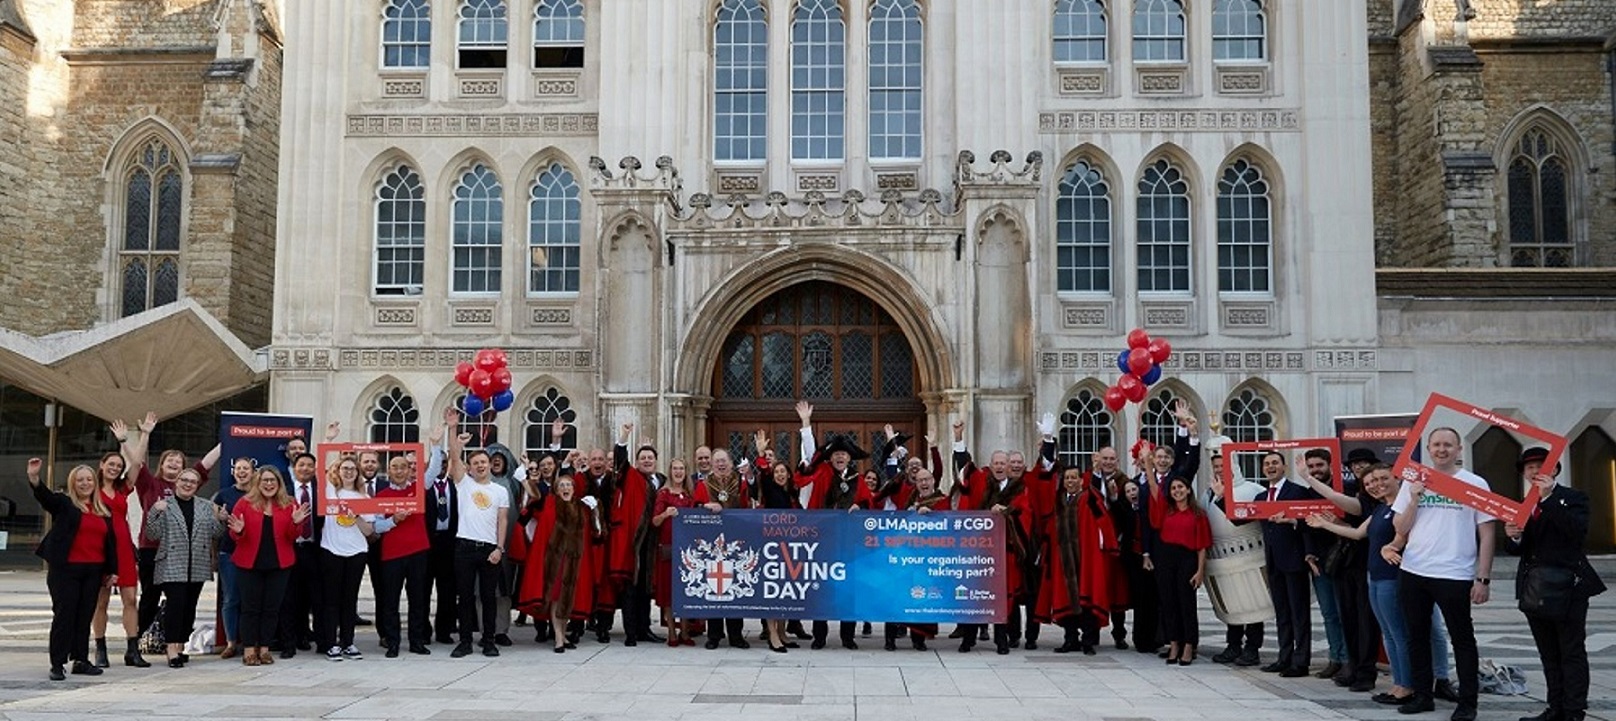 City Giving Day Guildhall Yard